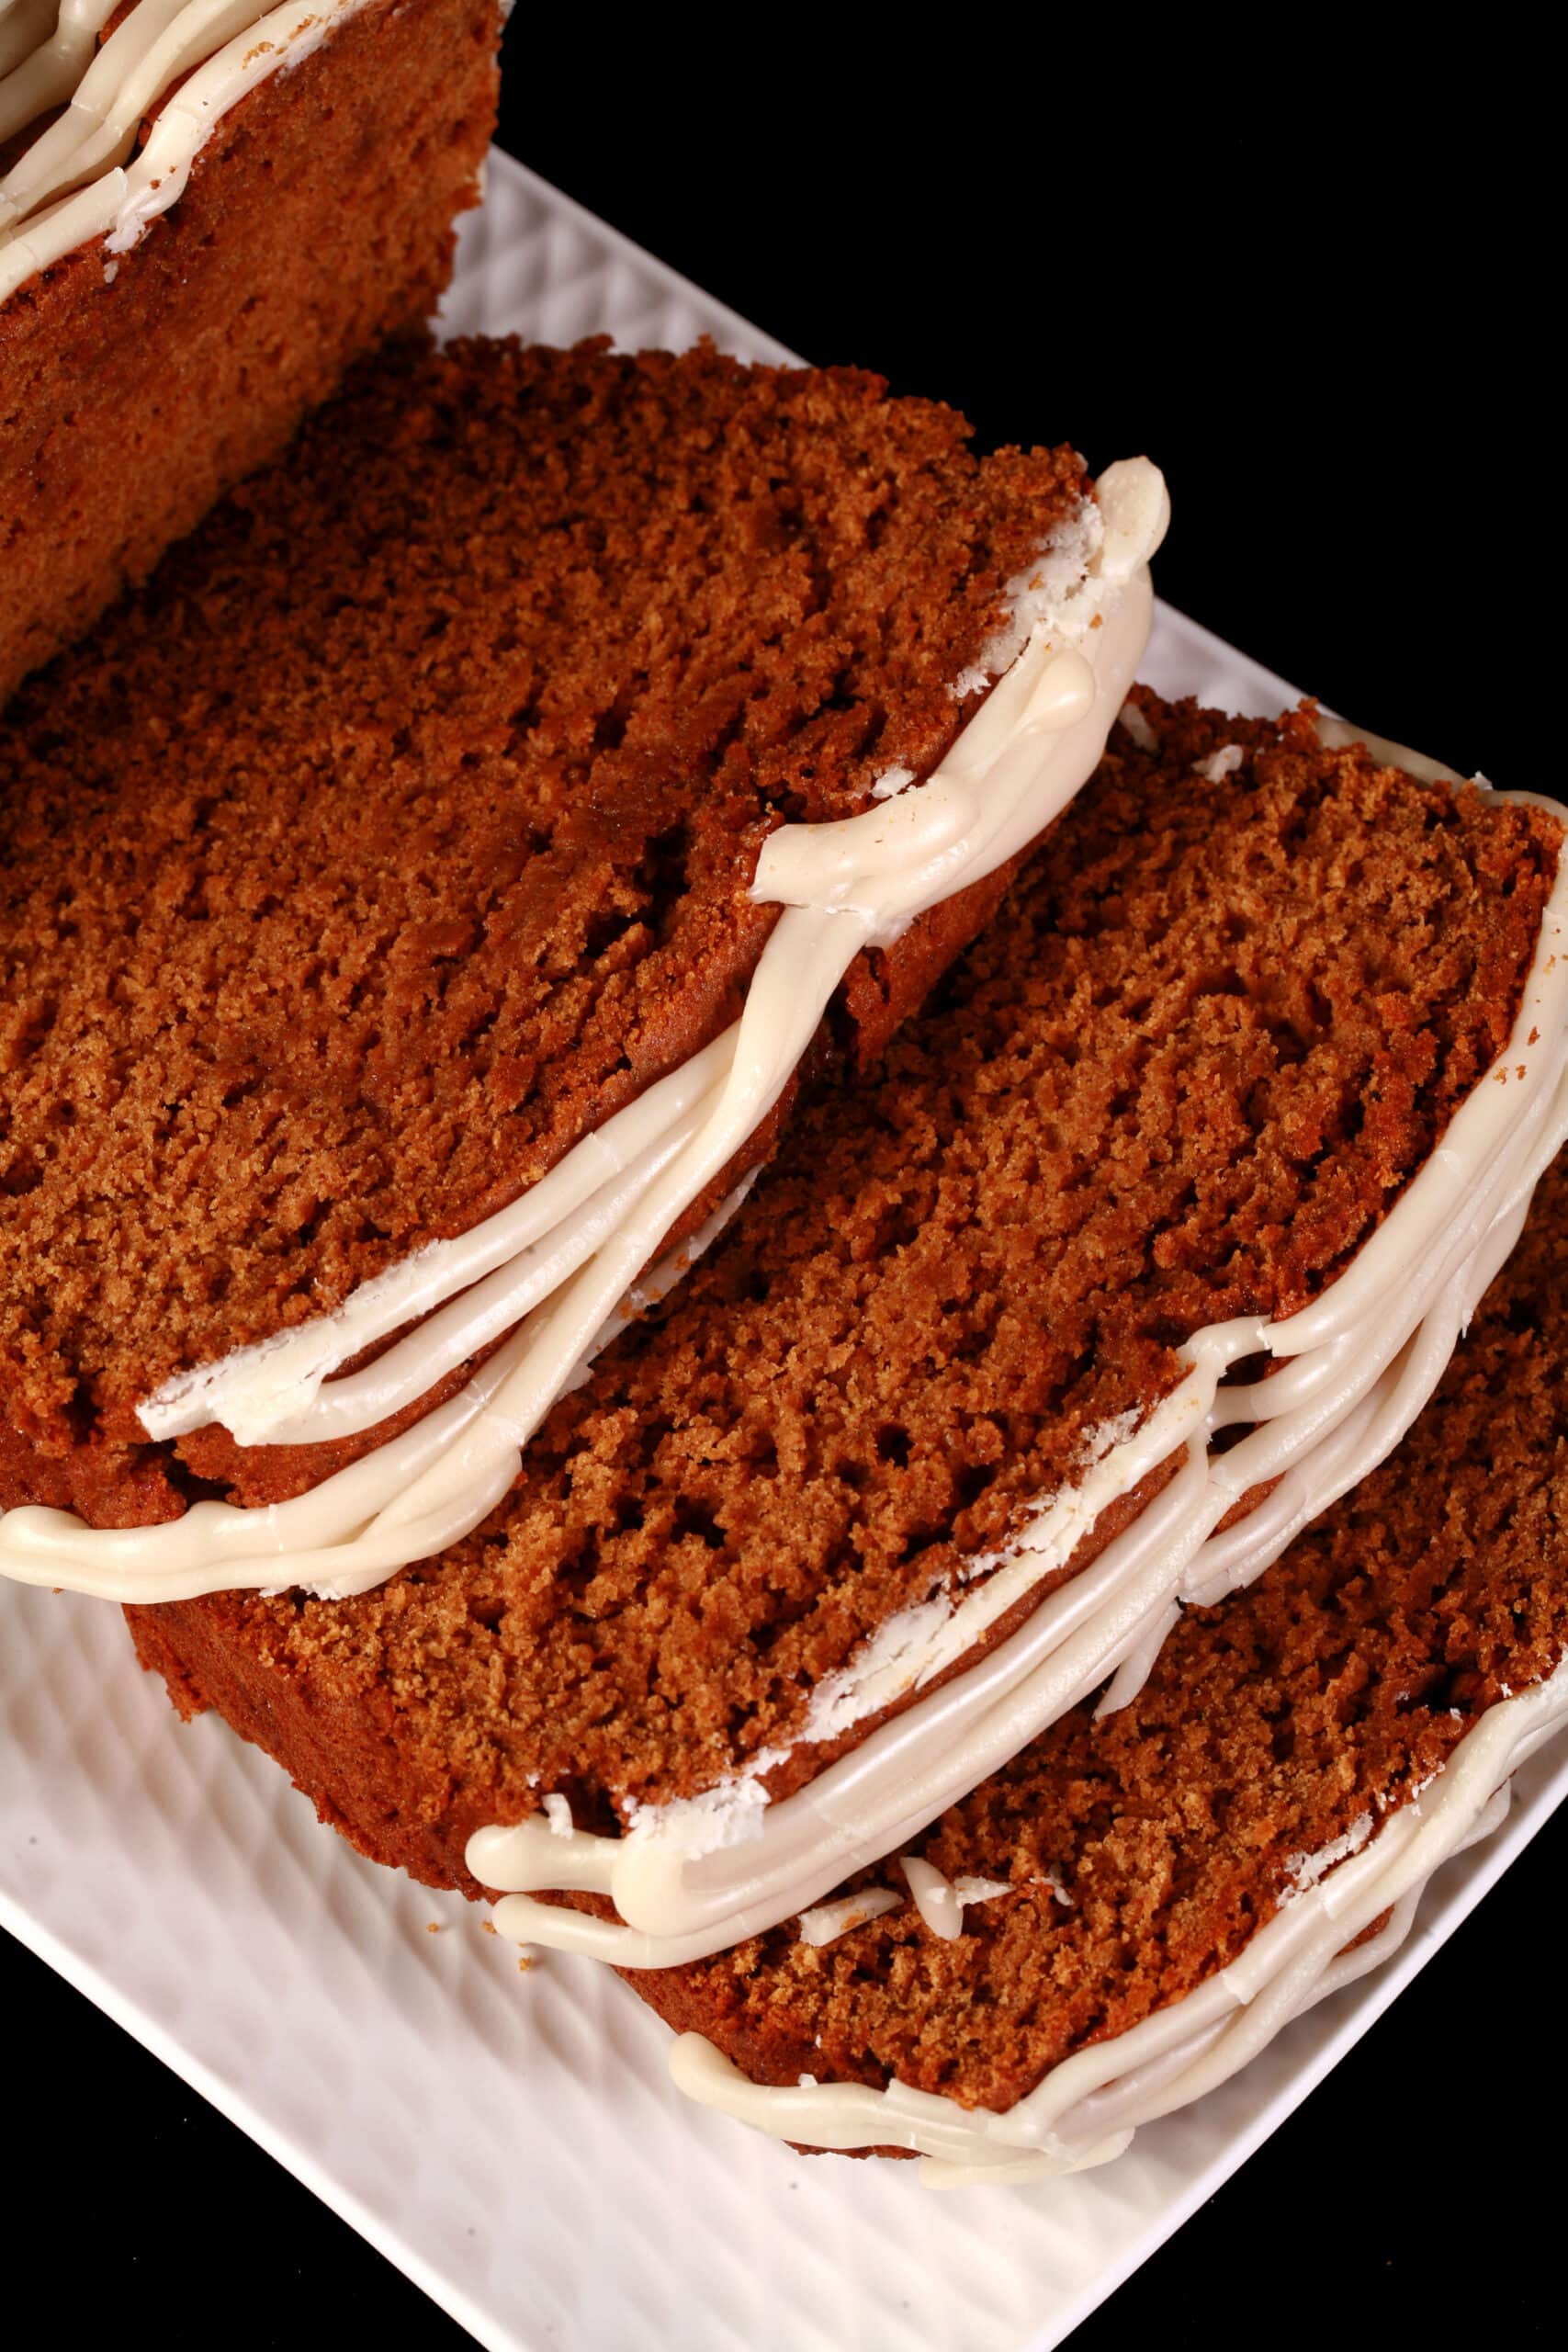 A sliced loaf of gluten-free gingerbread loaf, drizzled with vanilla glaze and garnished with rosemary and cranberries.